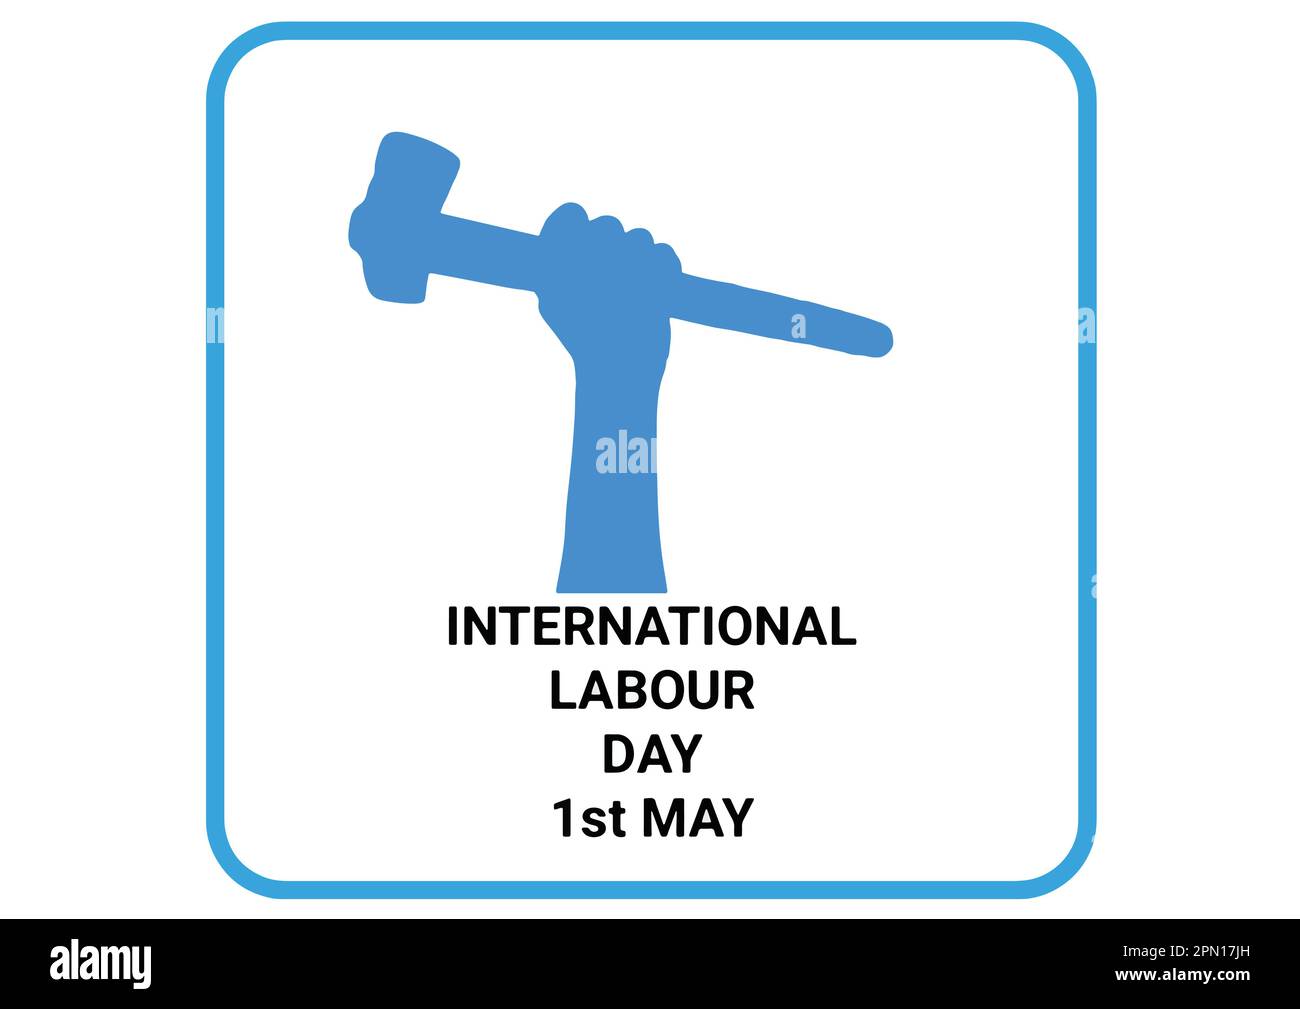 International Labour Day. 1st May. Holiday concept. Template for background, banner, card, poster with text inscription. Stock Vector